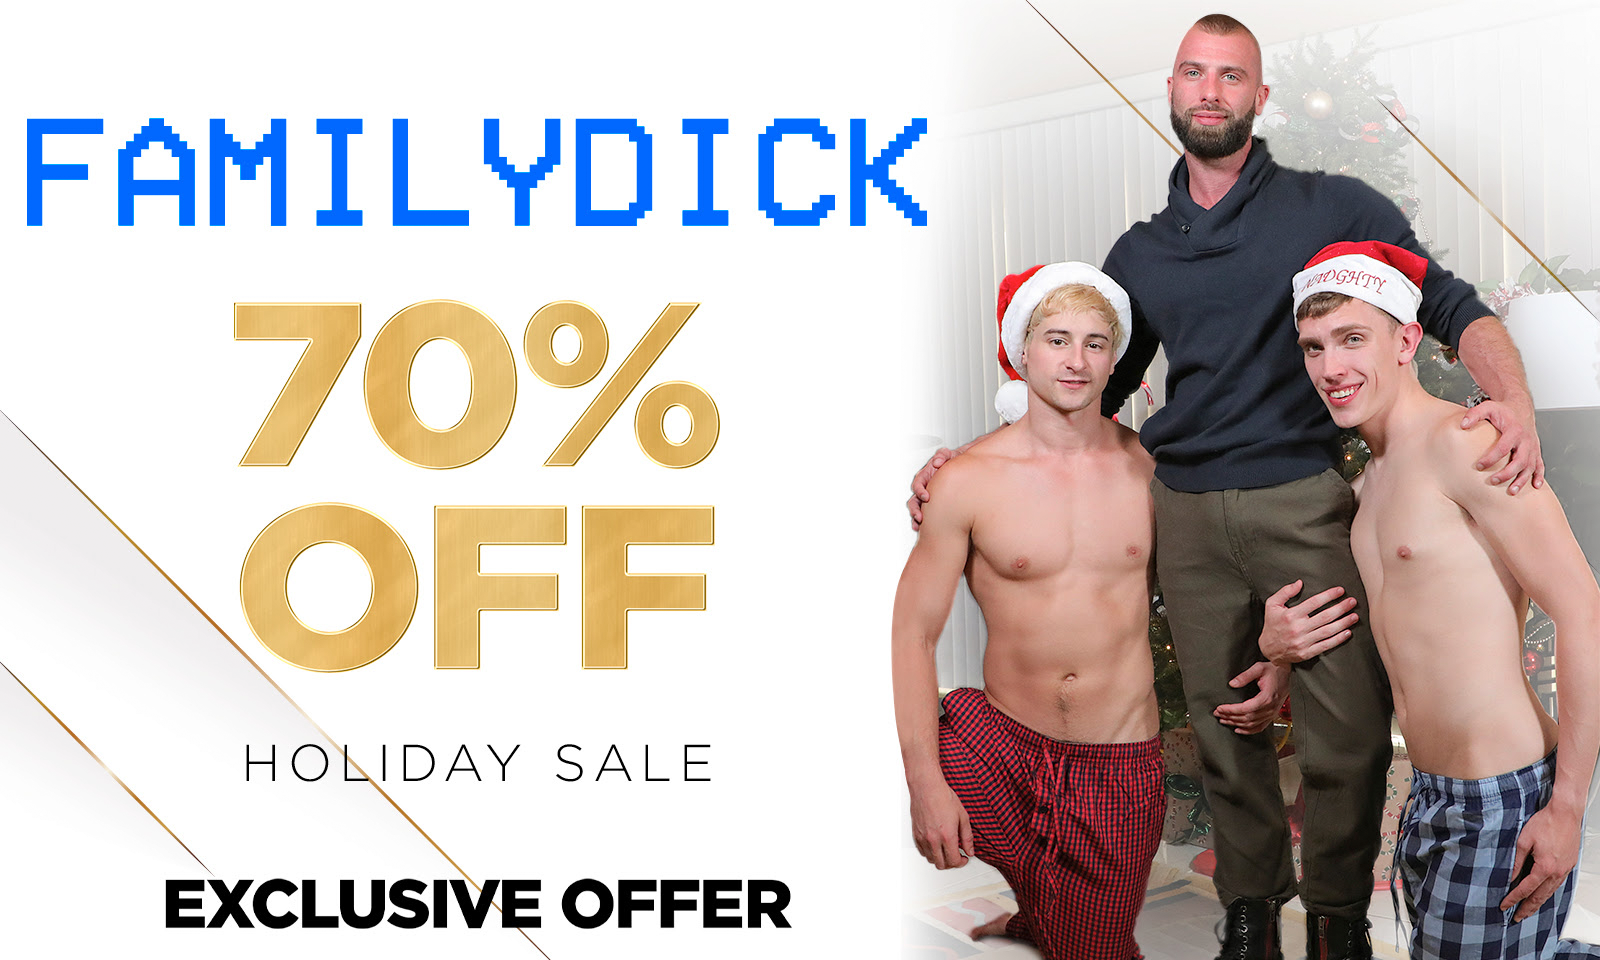 Premium Gay Porn Network Family Dick Offering Discount